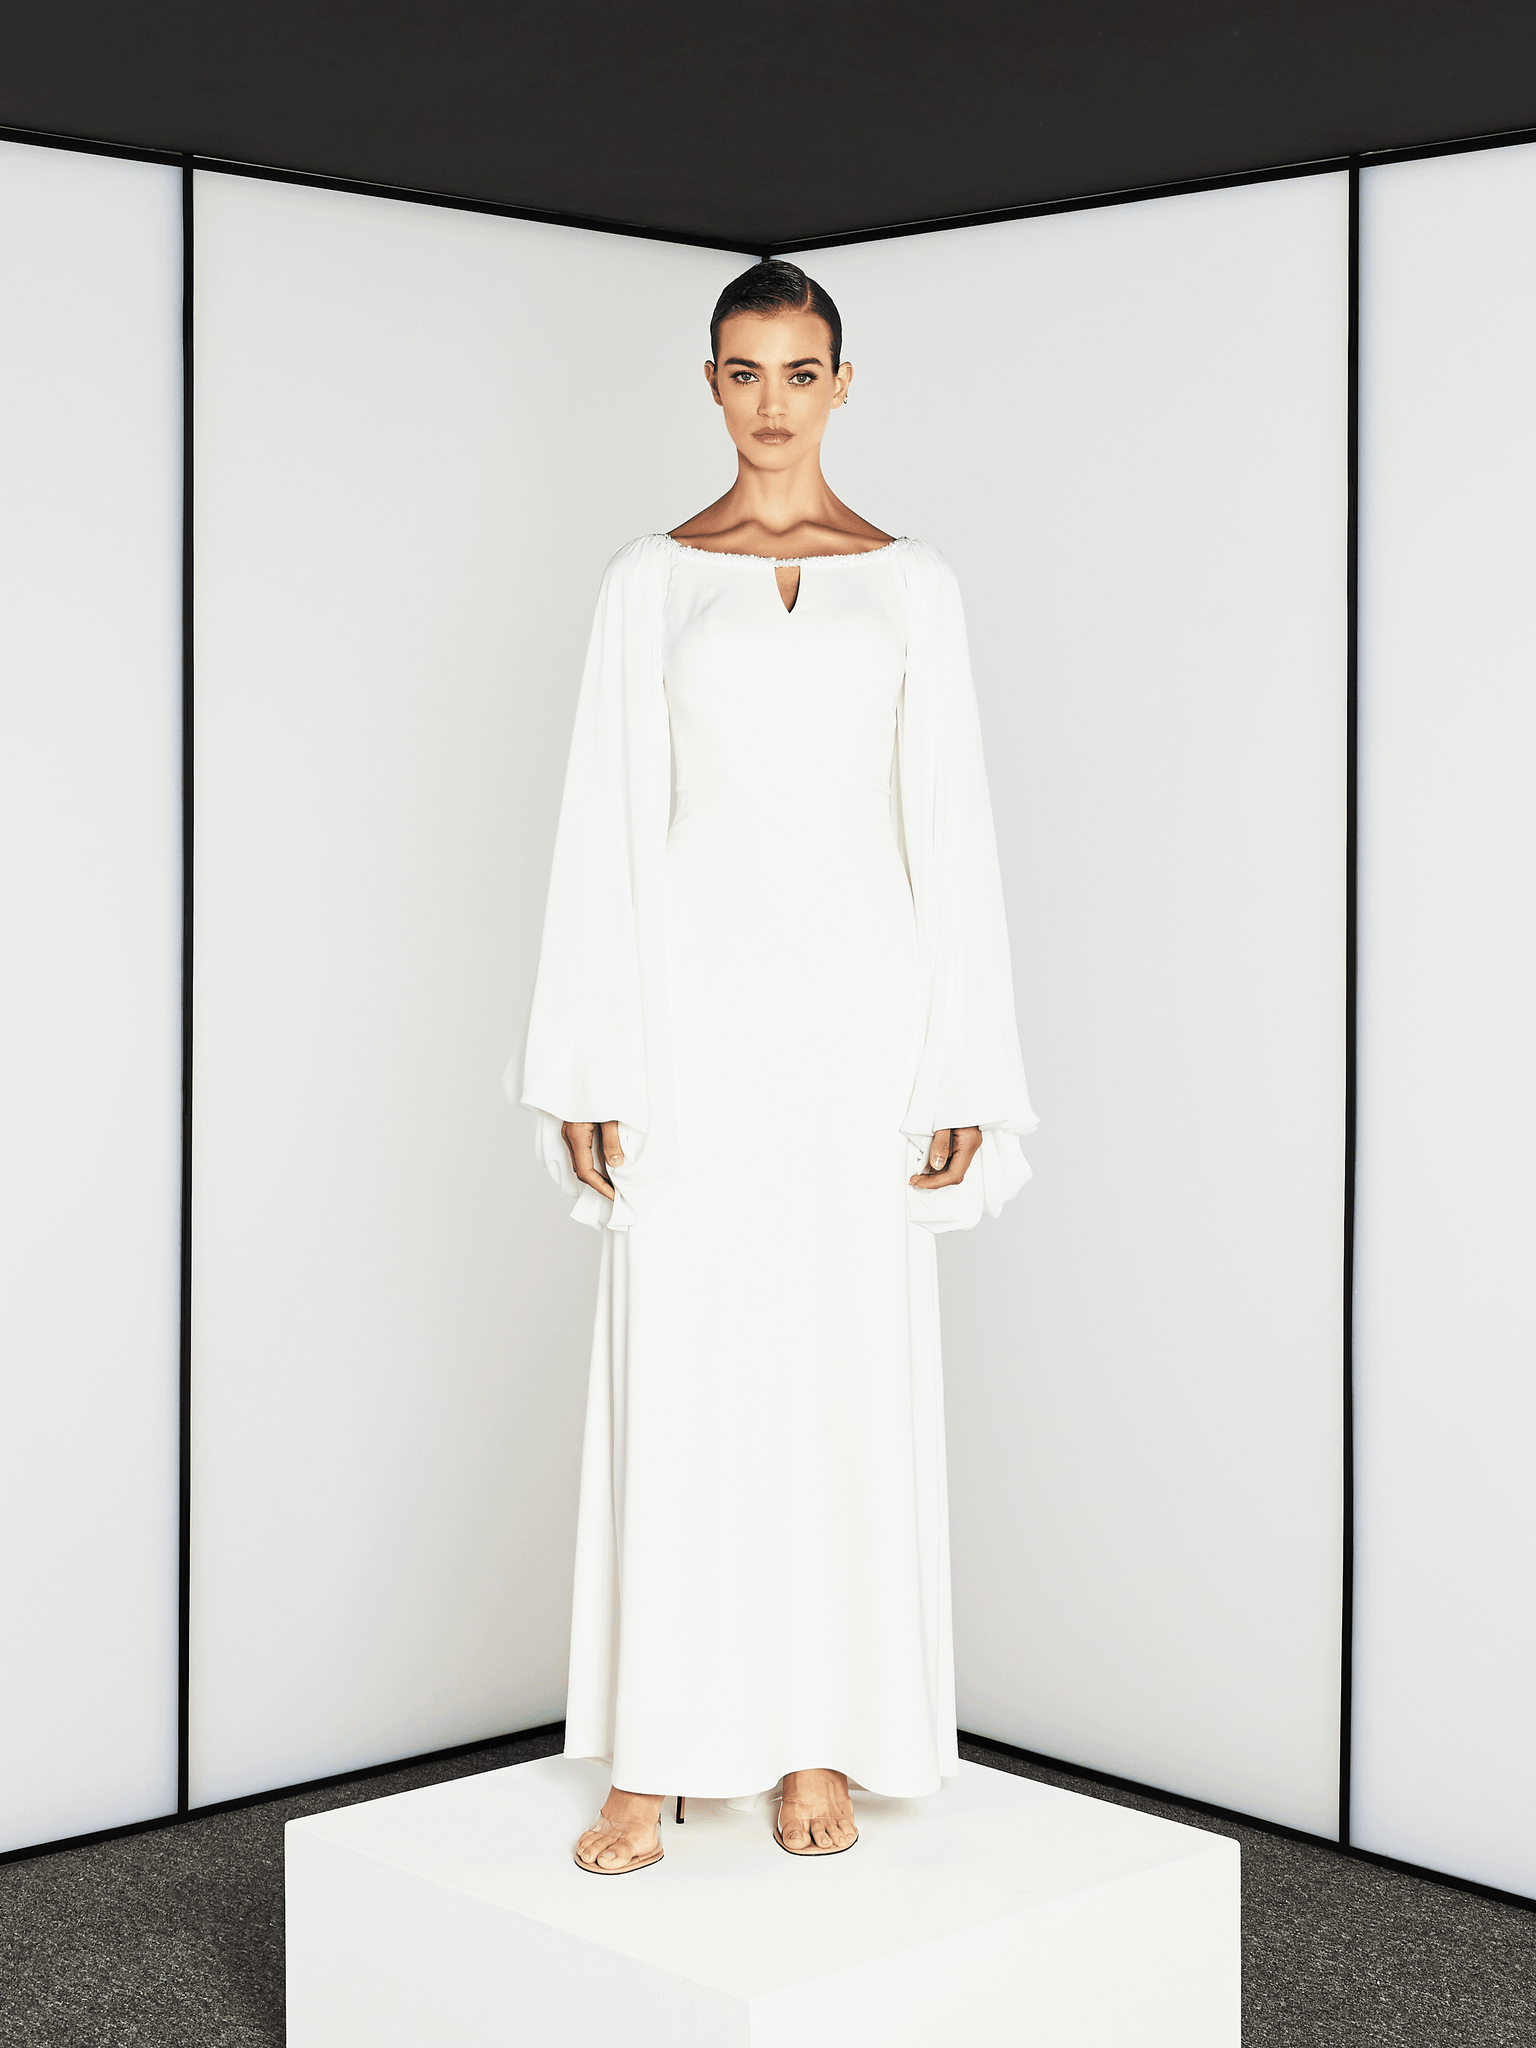 SEMI A-LINE CUT WITH DRAMATIC SLEEVES AND EMBROIDERY